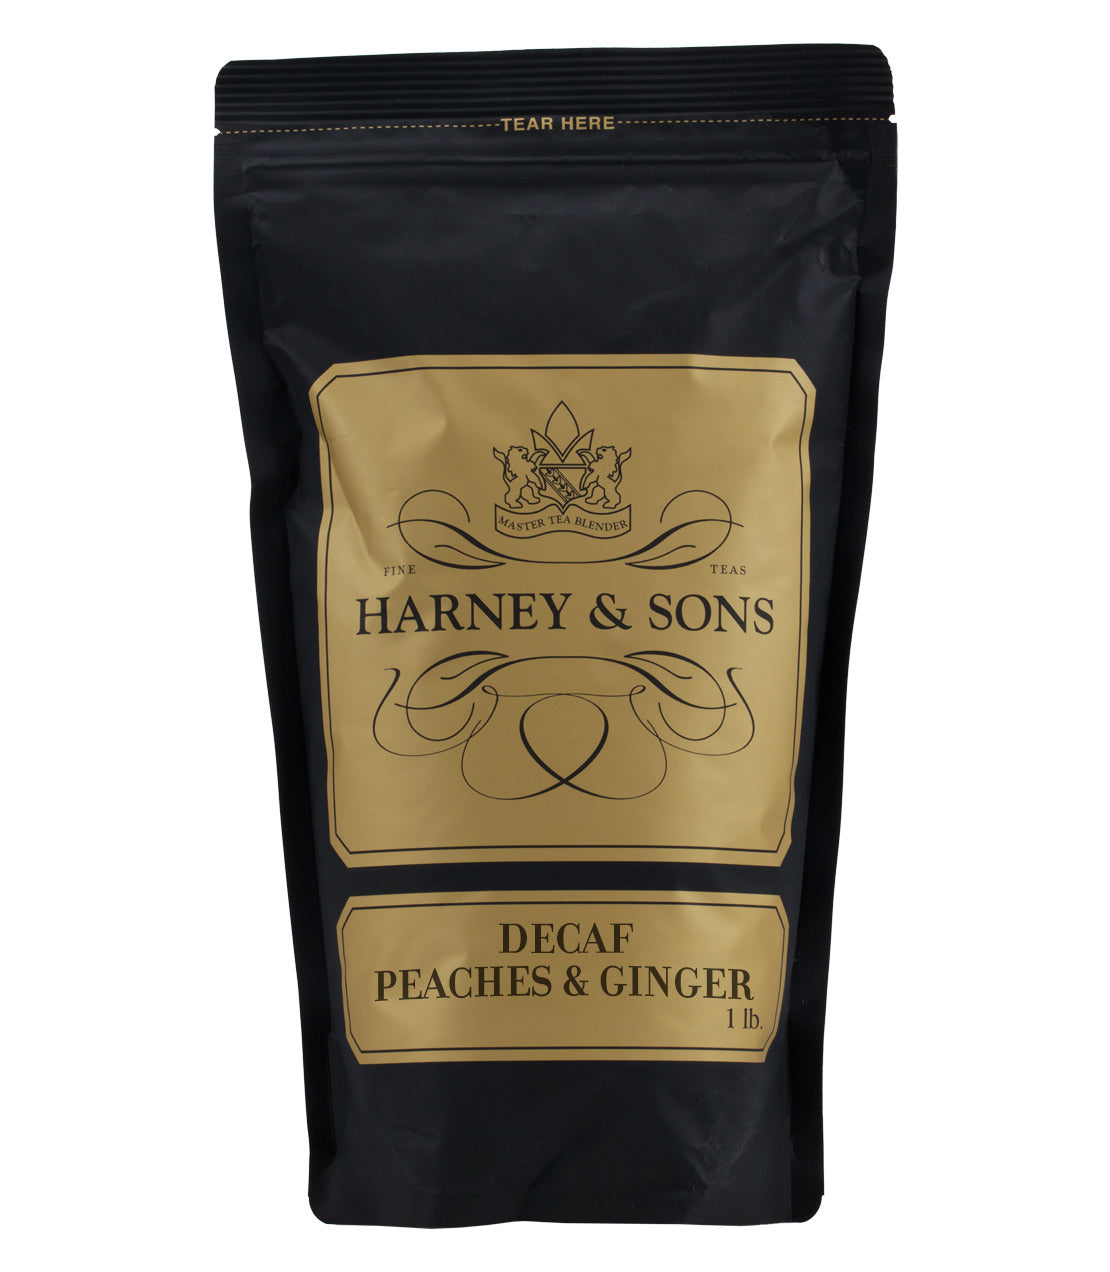 Decaf Peaches & Ginger - Loose 1 lb. Bag - Harney & Sons Fine Teas